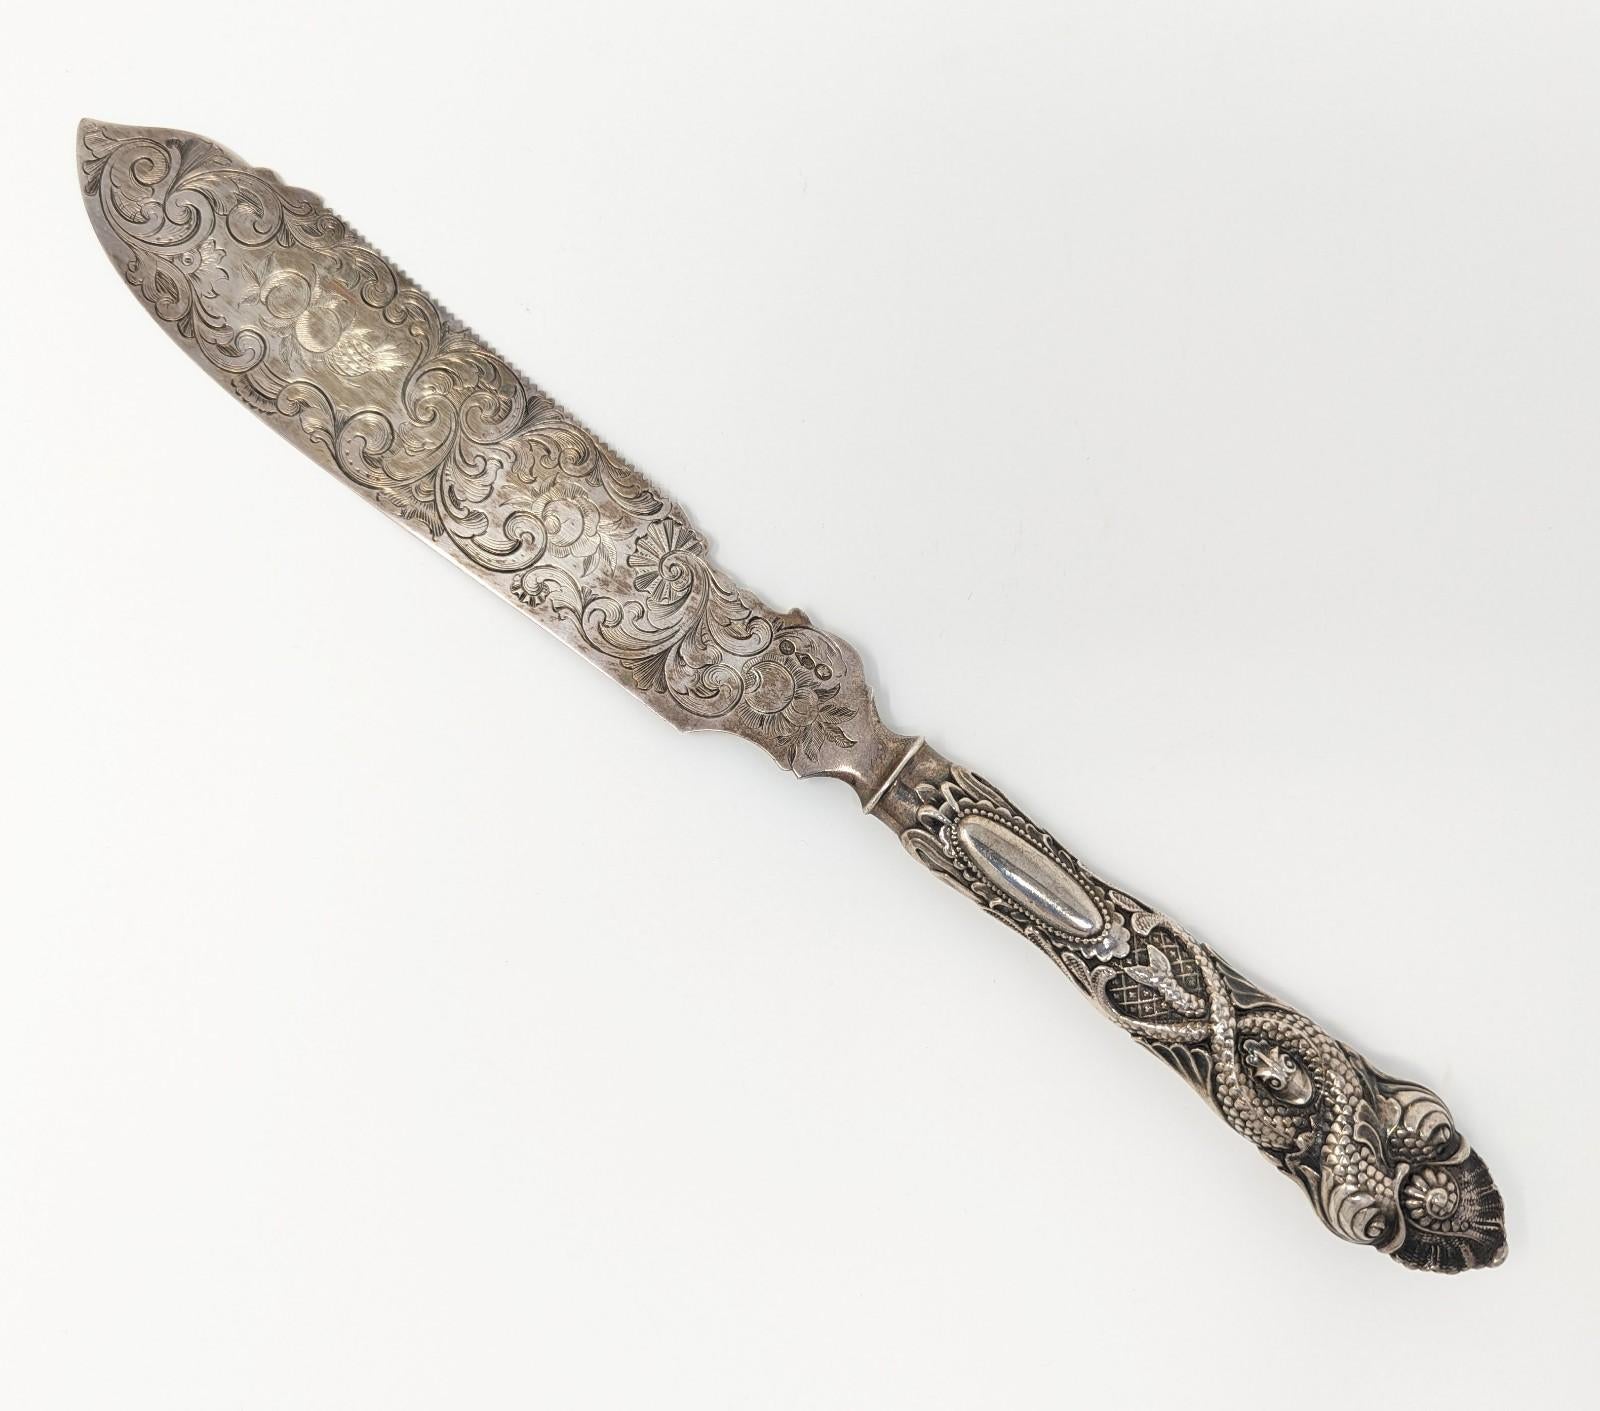 19th Century Antique Fish Knife Unique Sea Serpent Snake Sterling Silver French Cake Etched For Sale